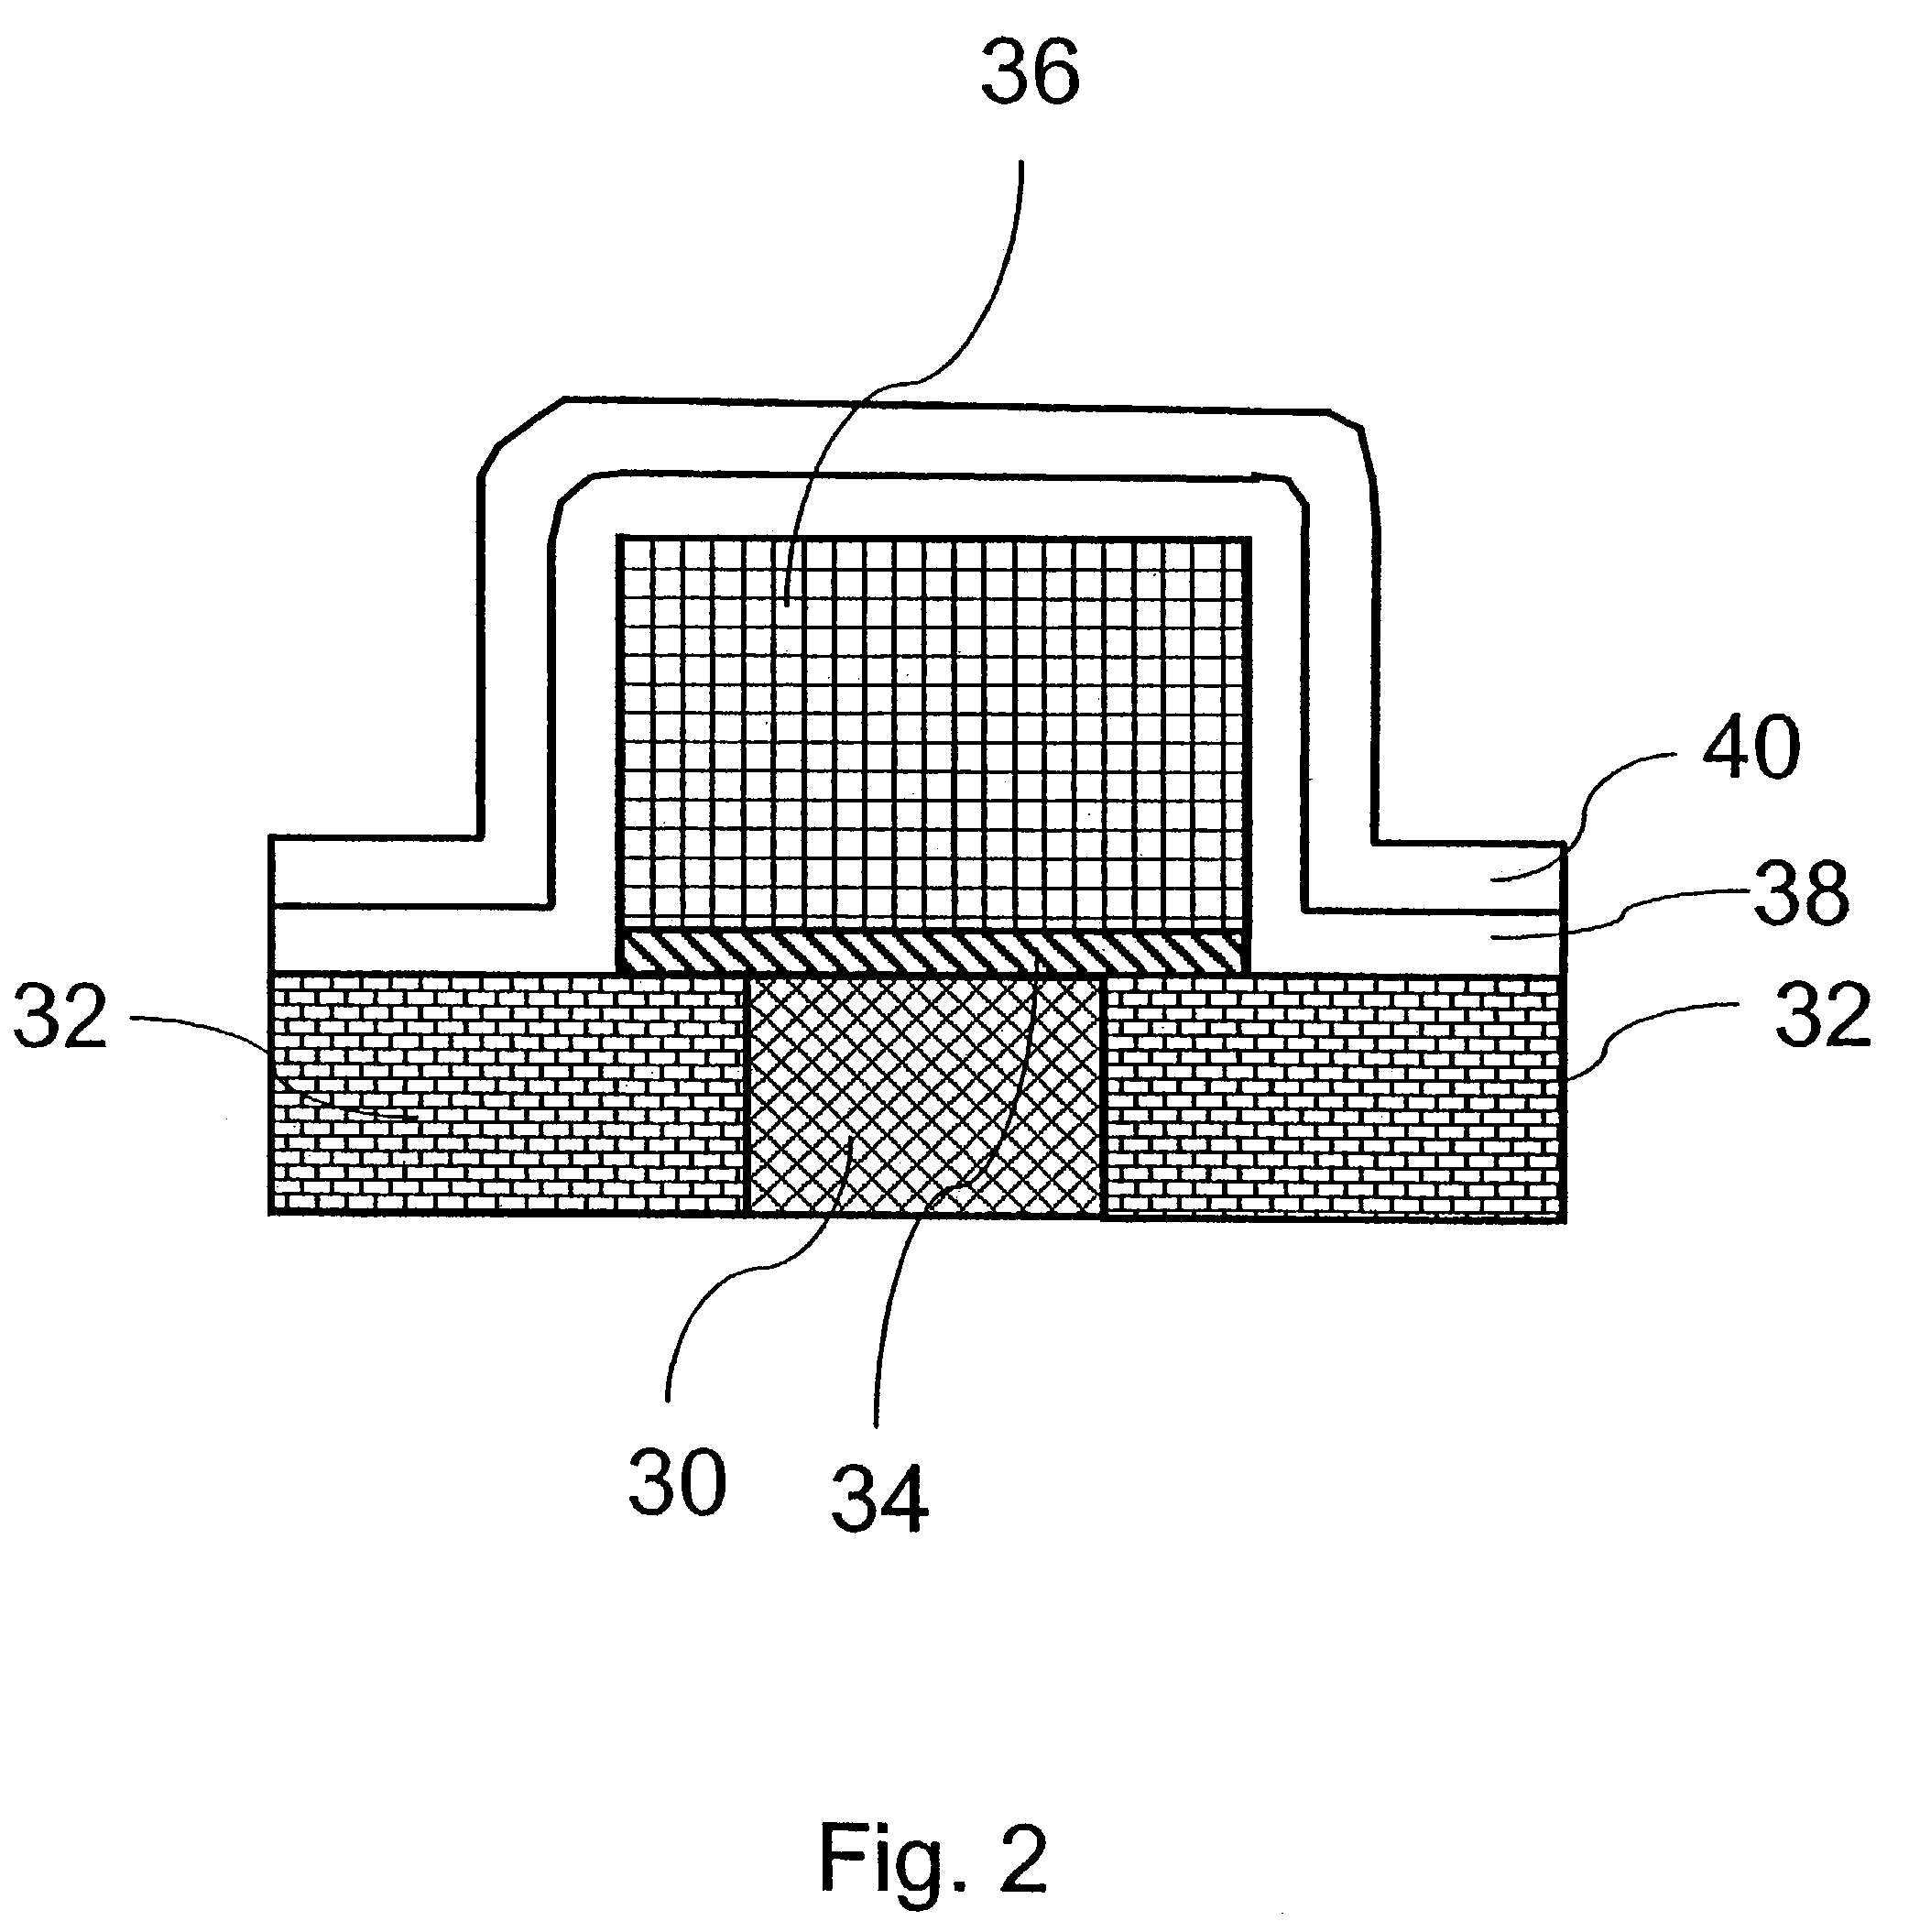 Method of growing electrical conductors